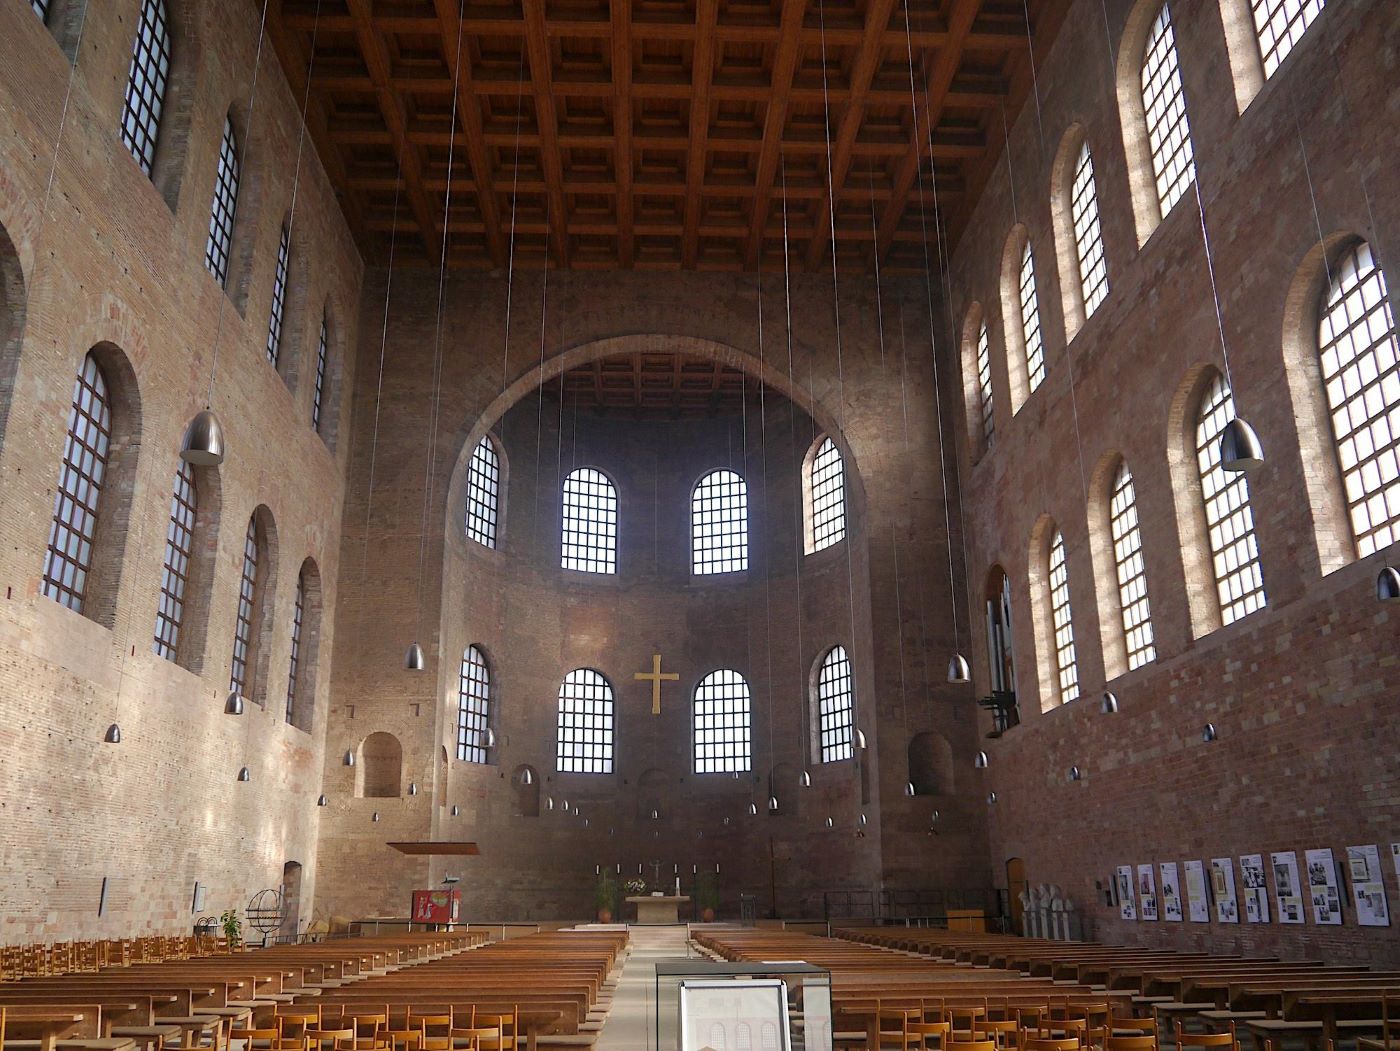 What Is The Round Extension At The End Of The Roman Basilica Hall